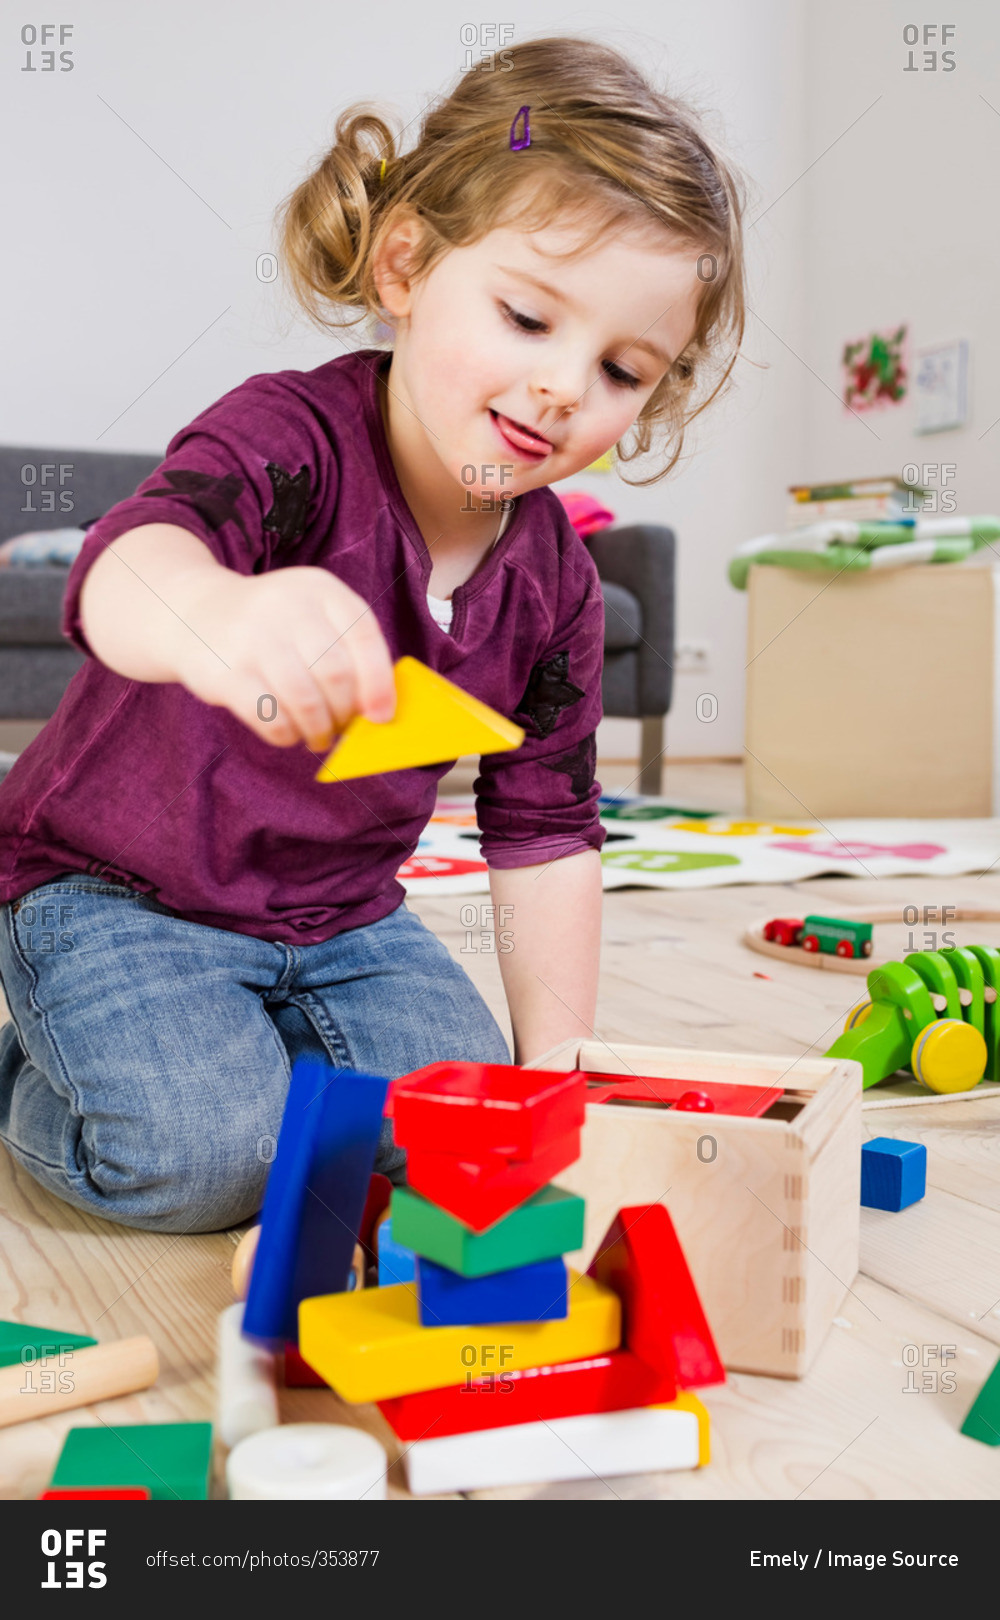 Girl playing with building blocks at home